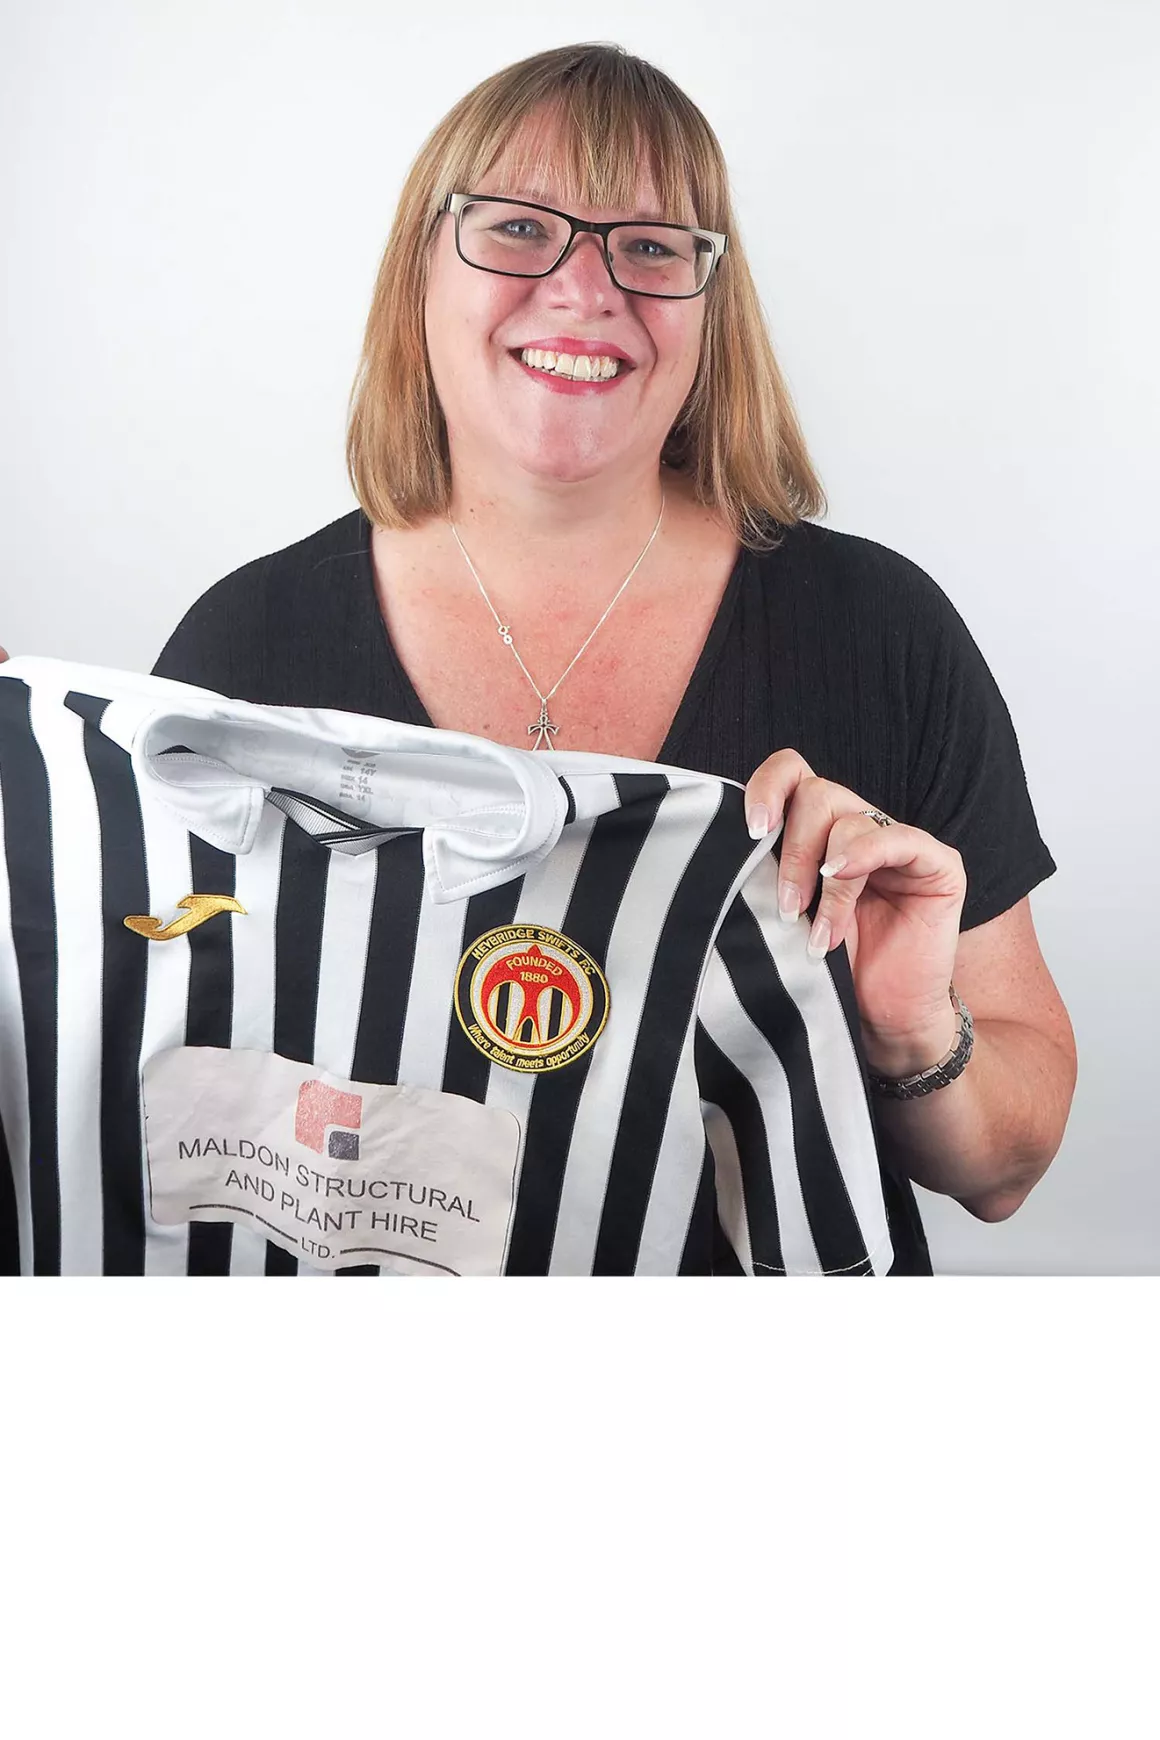 Nicola Edmead wearing black top and black glasses, holding prop which is a football shirt